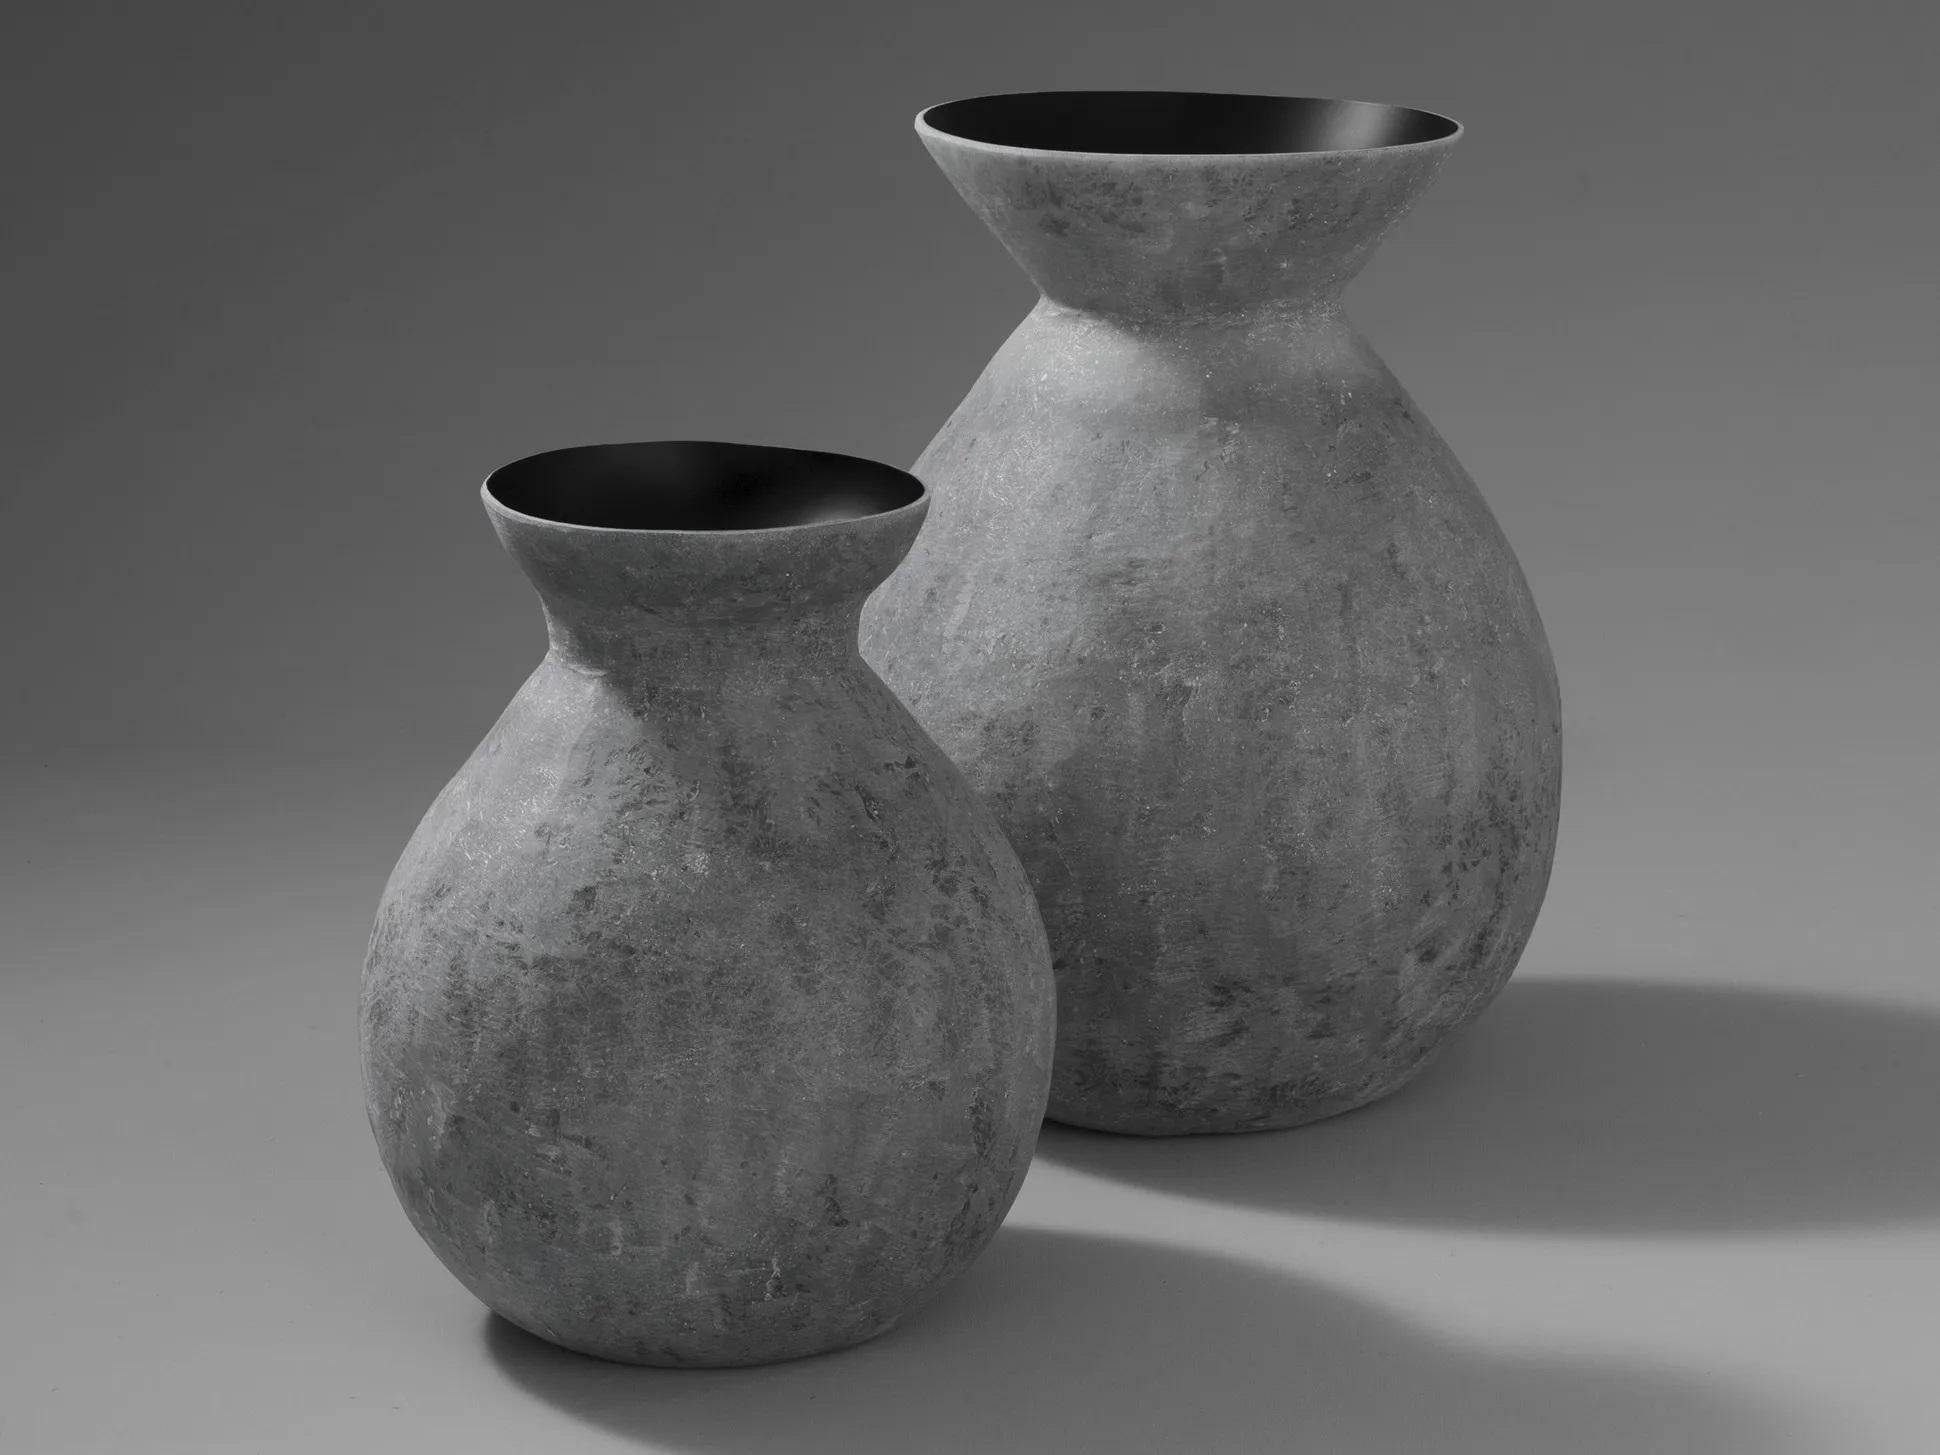 Set of 2 pot vases by Imperfettolab
Dimensions: Ø 36 x H 46 cm, Ø 30 x H 40 cm
Materials: fiberglass

A traditional shape, to which the fiberglass and its careful processing give a contemporary style. An ideal vase for a minimal and